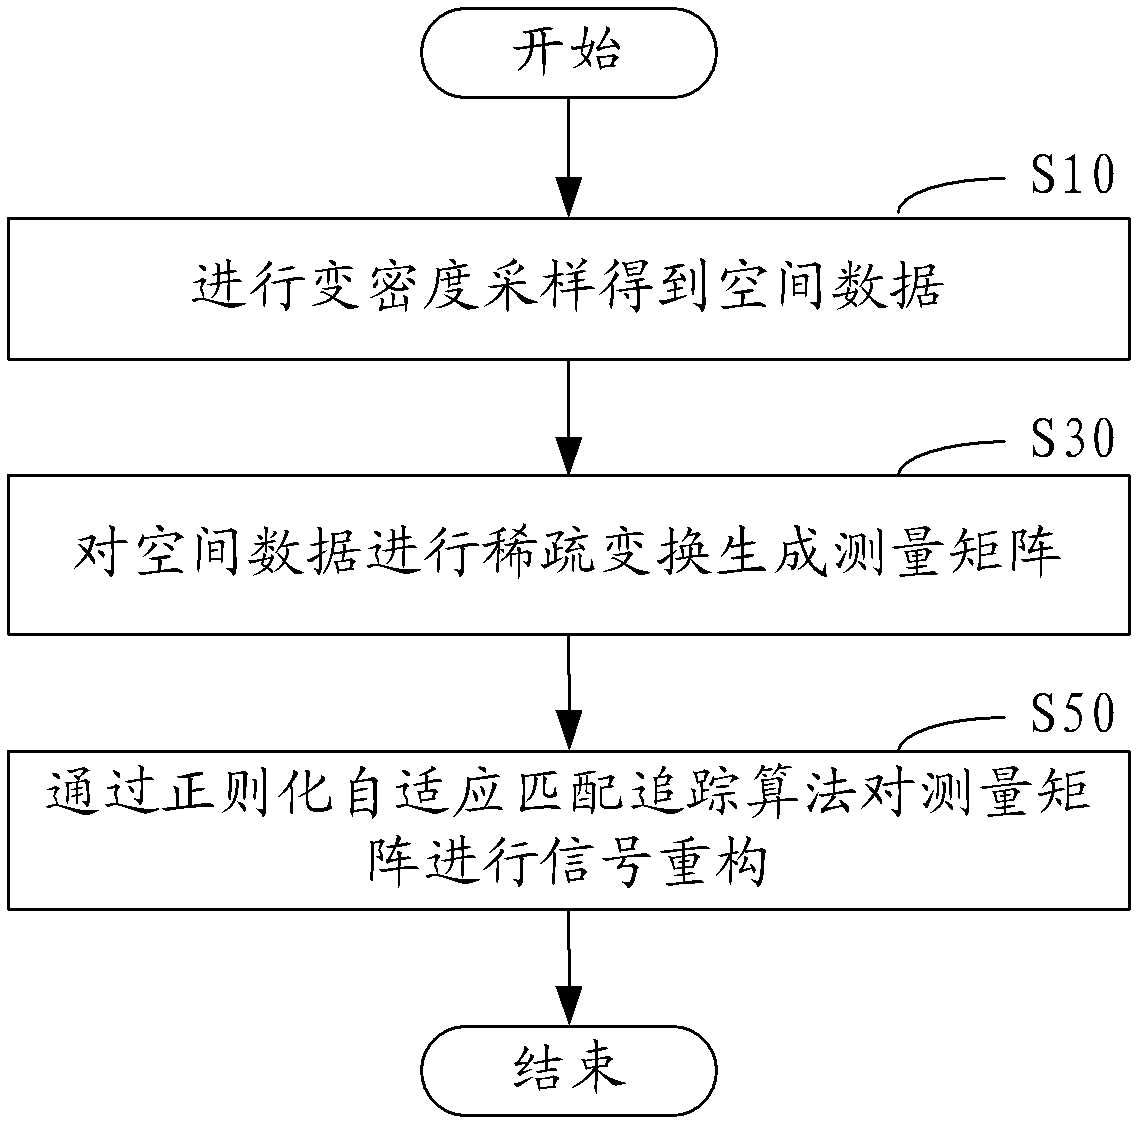 Rapid magnetic resonance imaging method and system